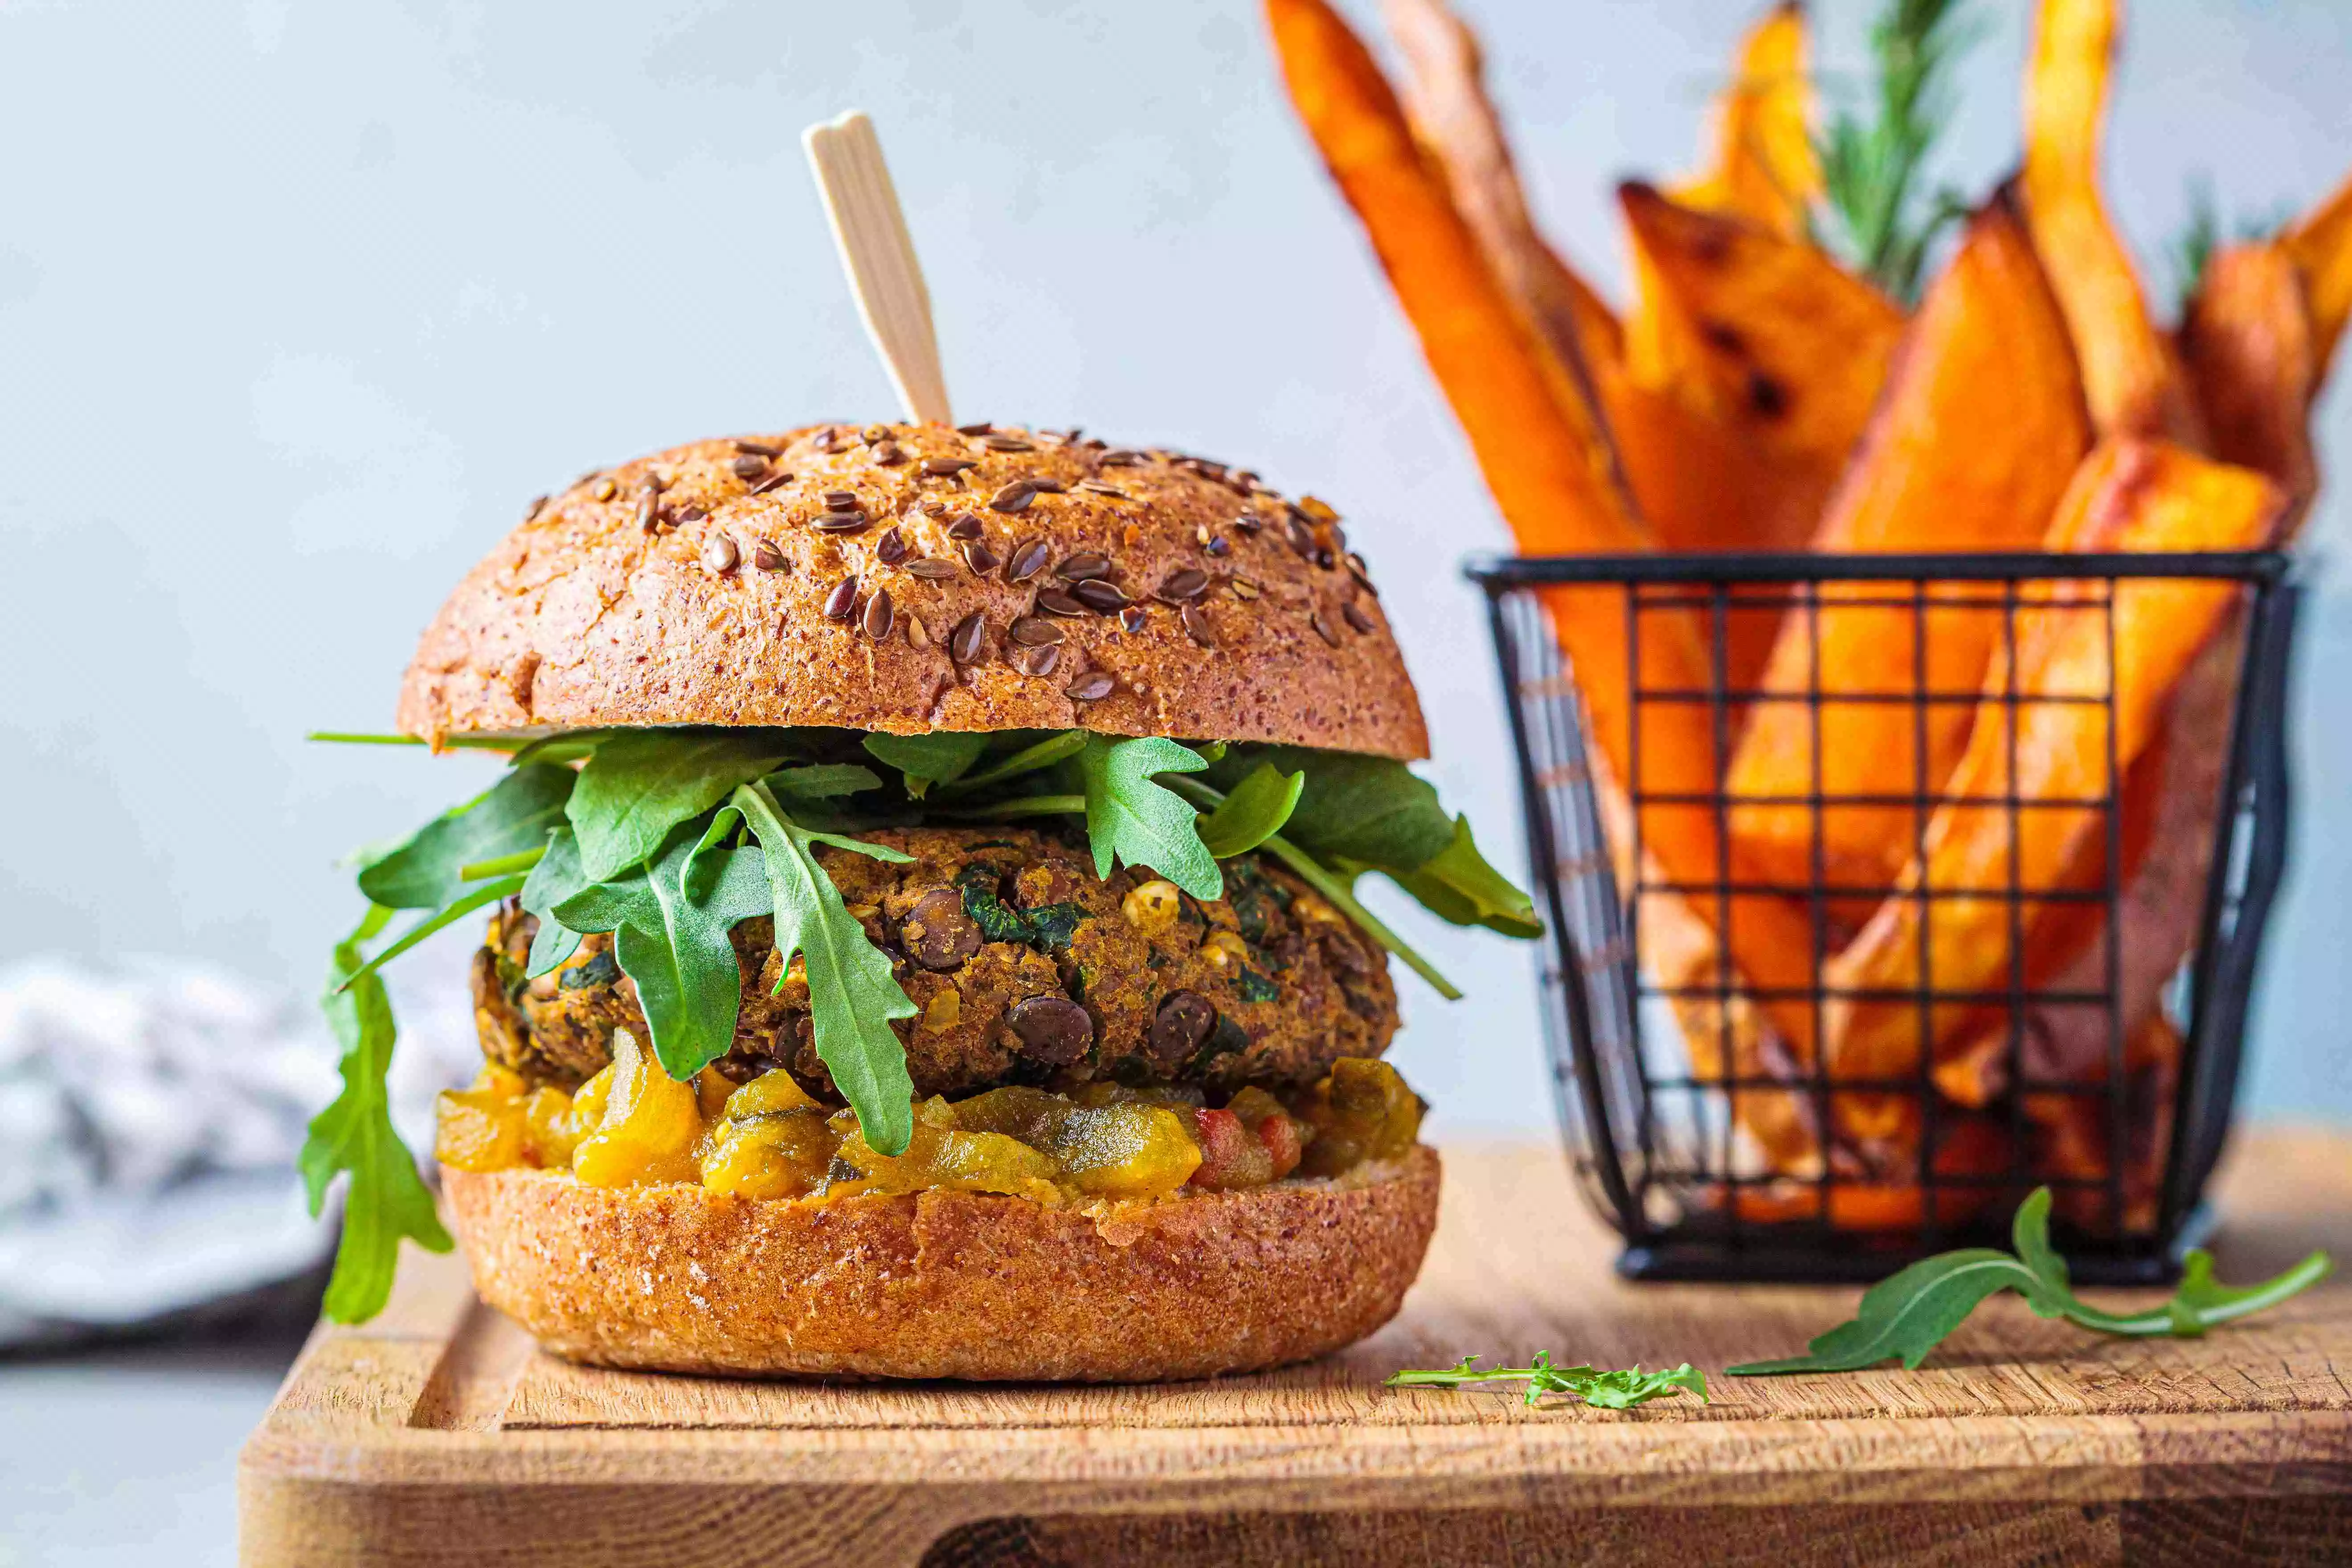 Plant based foods are big in the 2022 food and beverage trend